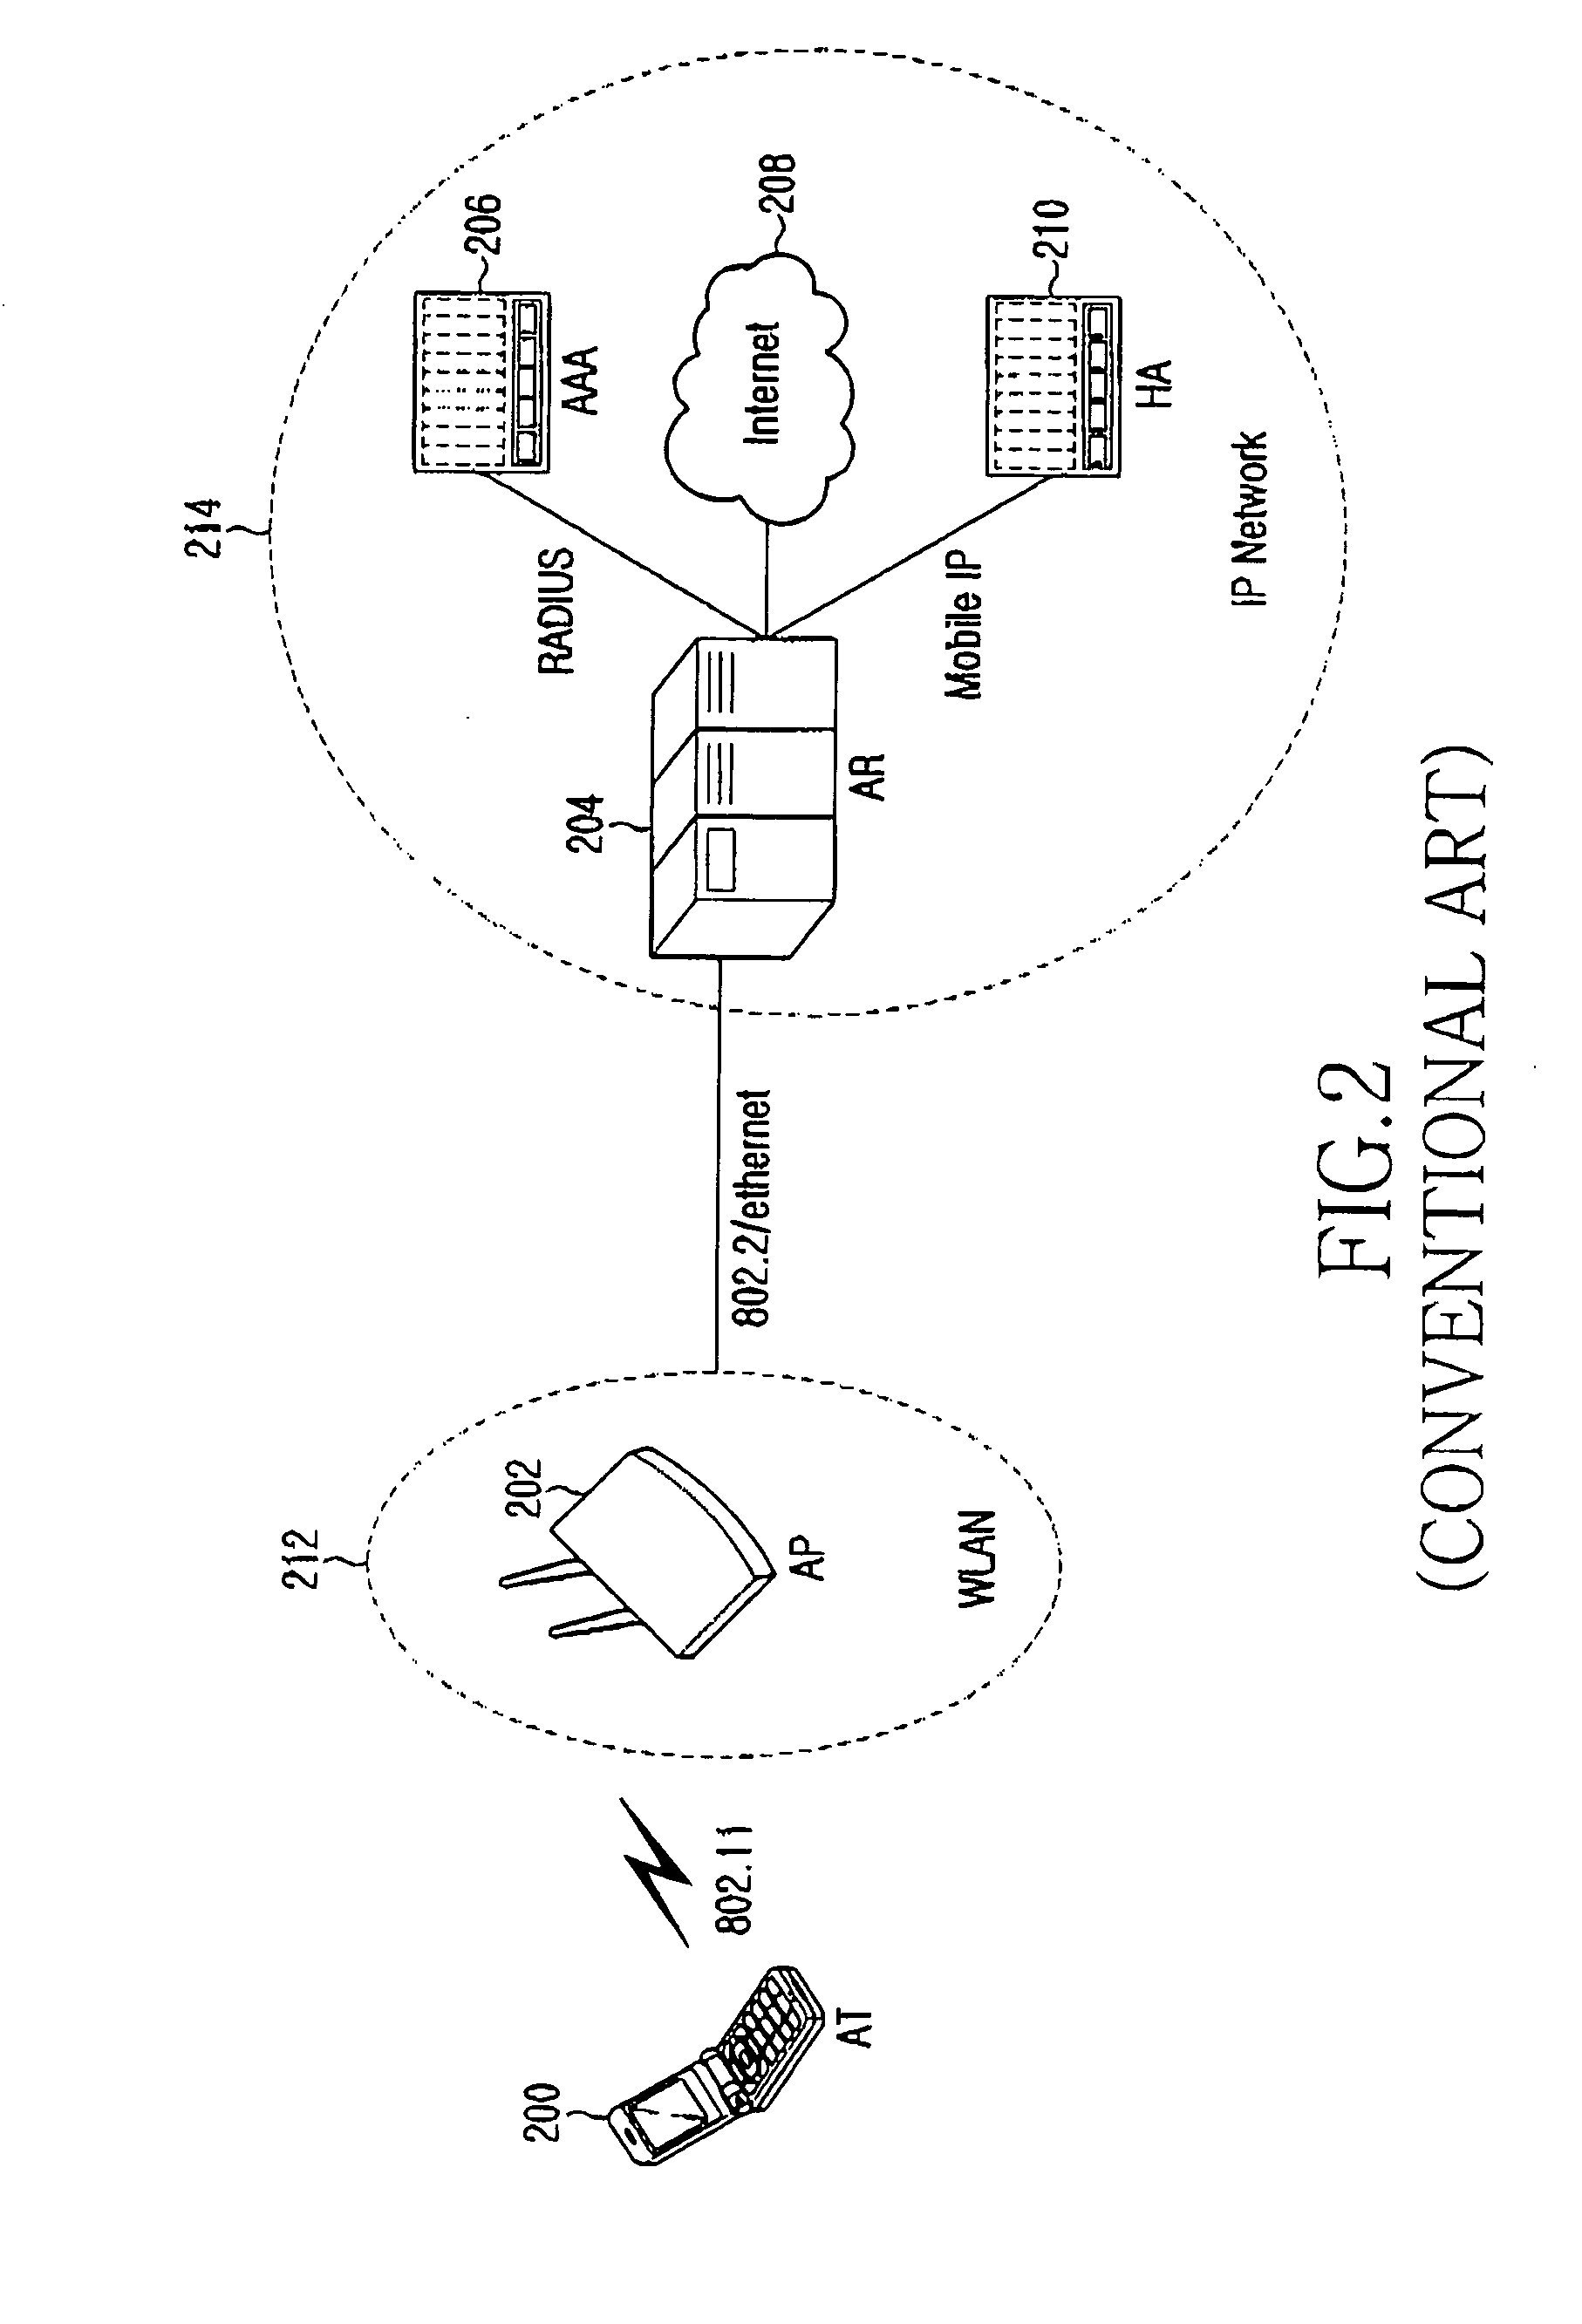 System and method for interworking between cellular network and wireless LAN